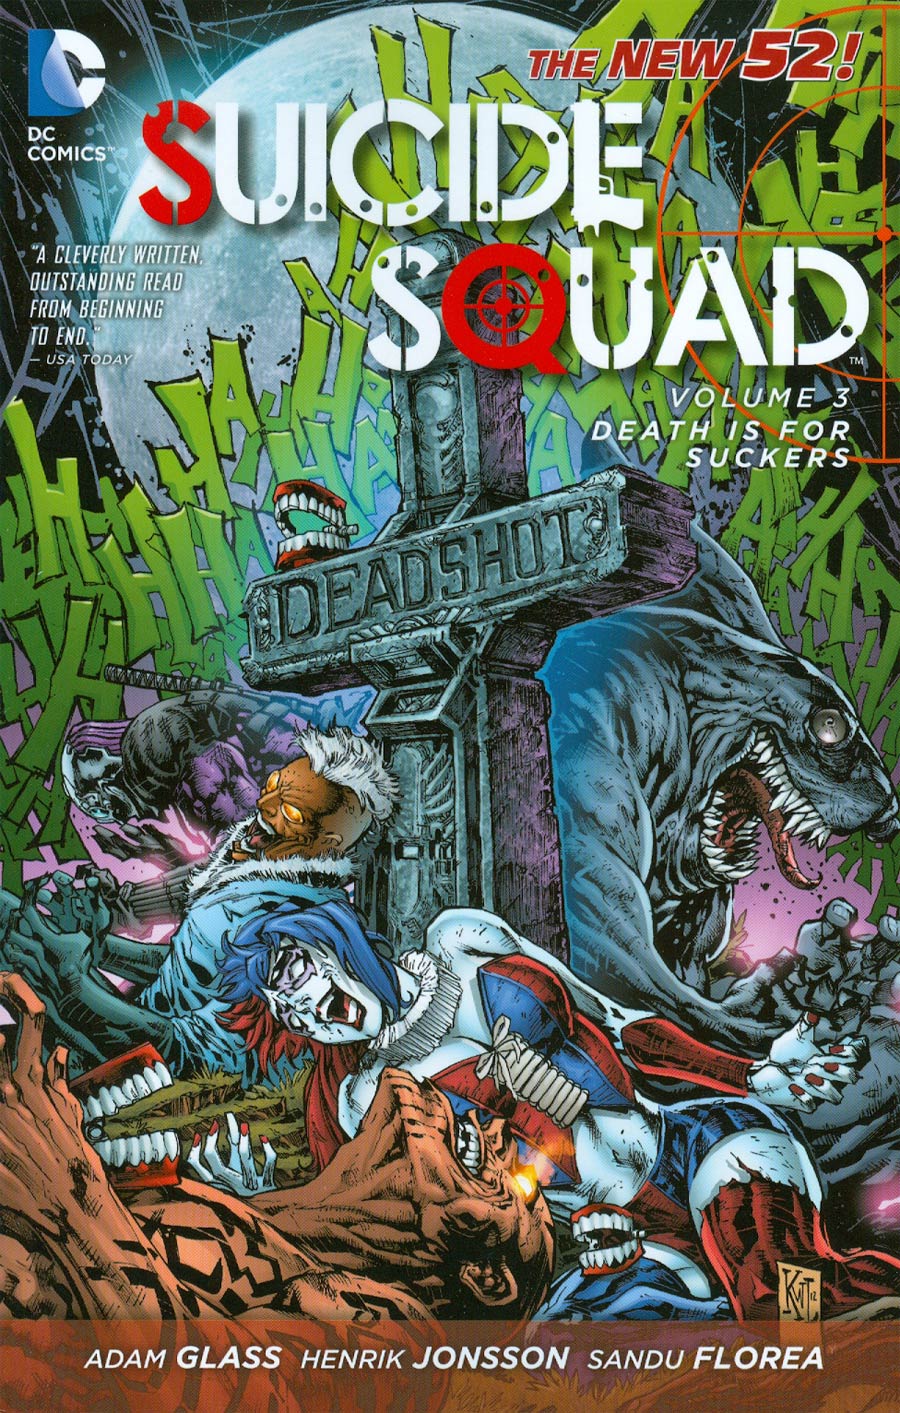 Suicide Squad (New 52) Vol 3 Death Is For Suckers TP